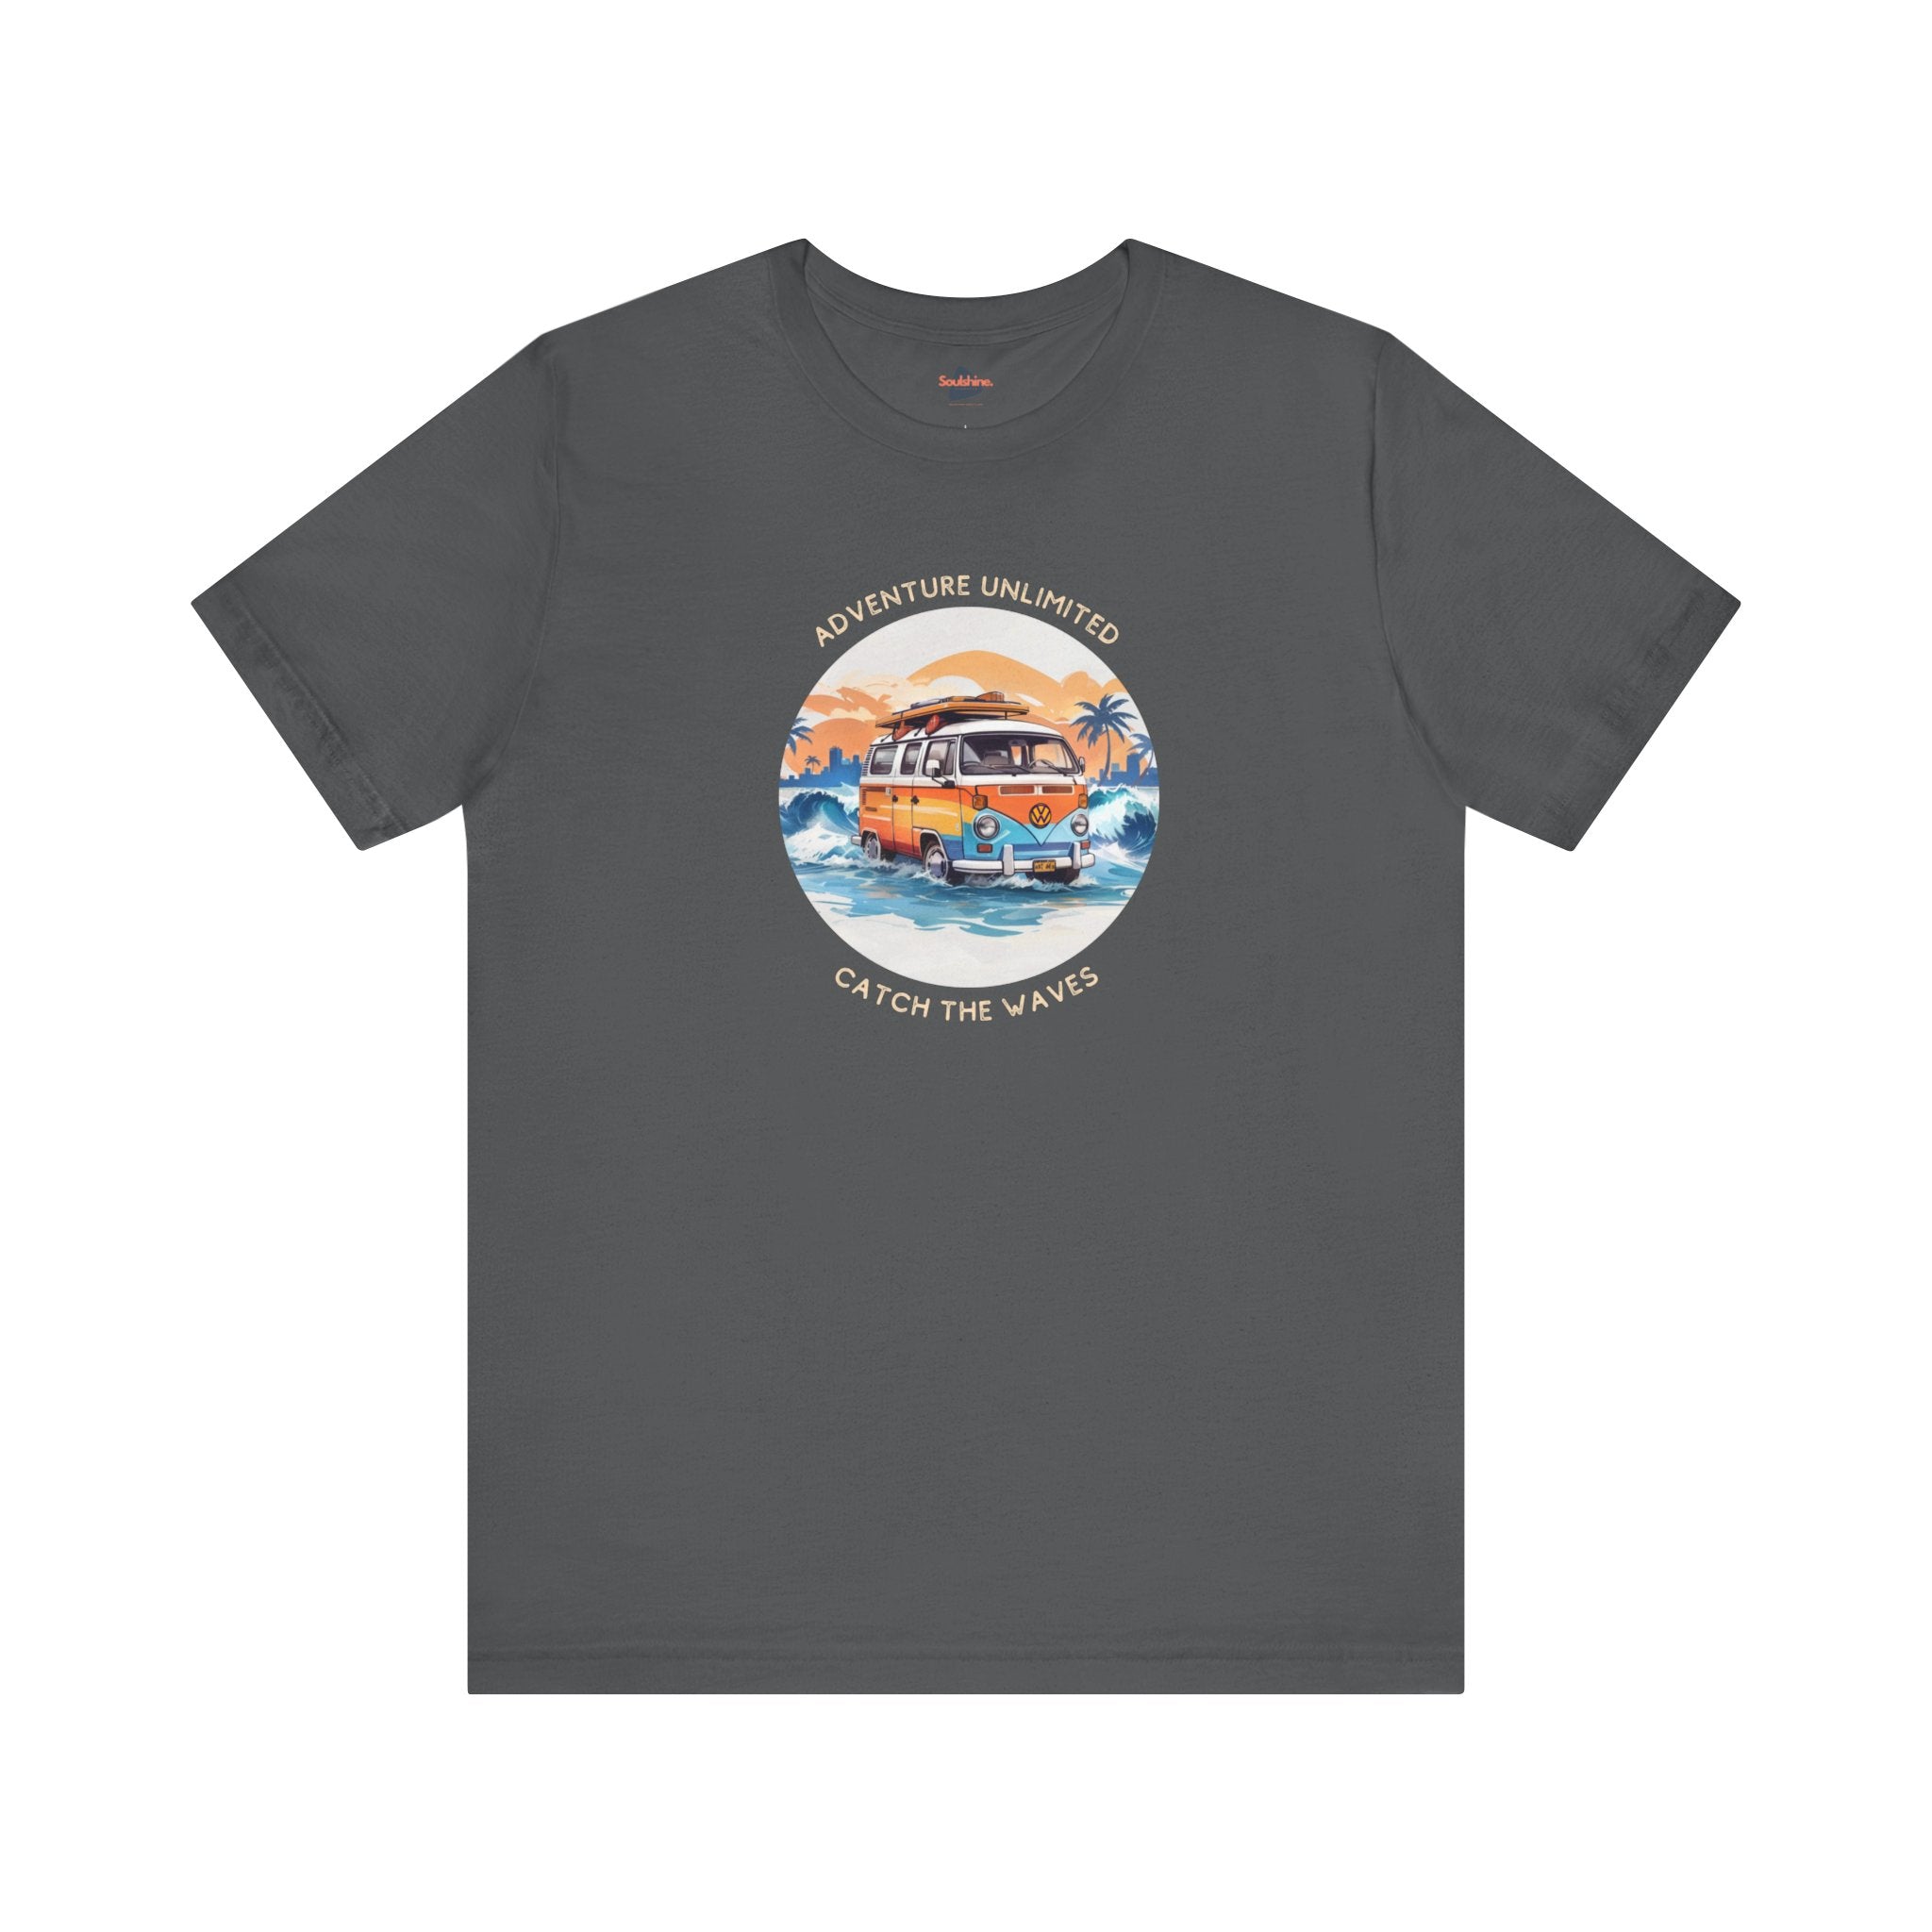 Adventure Unlimited black unisex tee with ` ` ` on the water design, direct-to-garment printed item